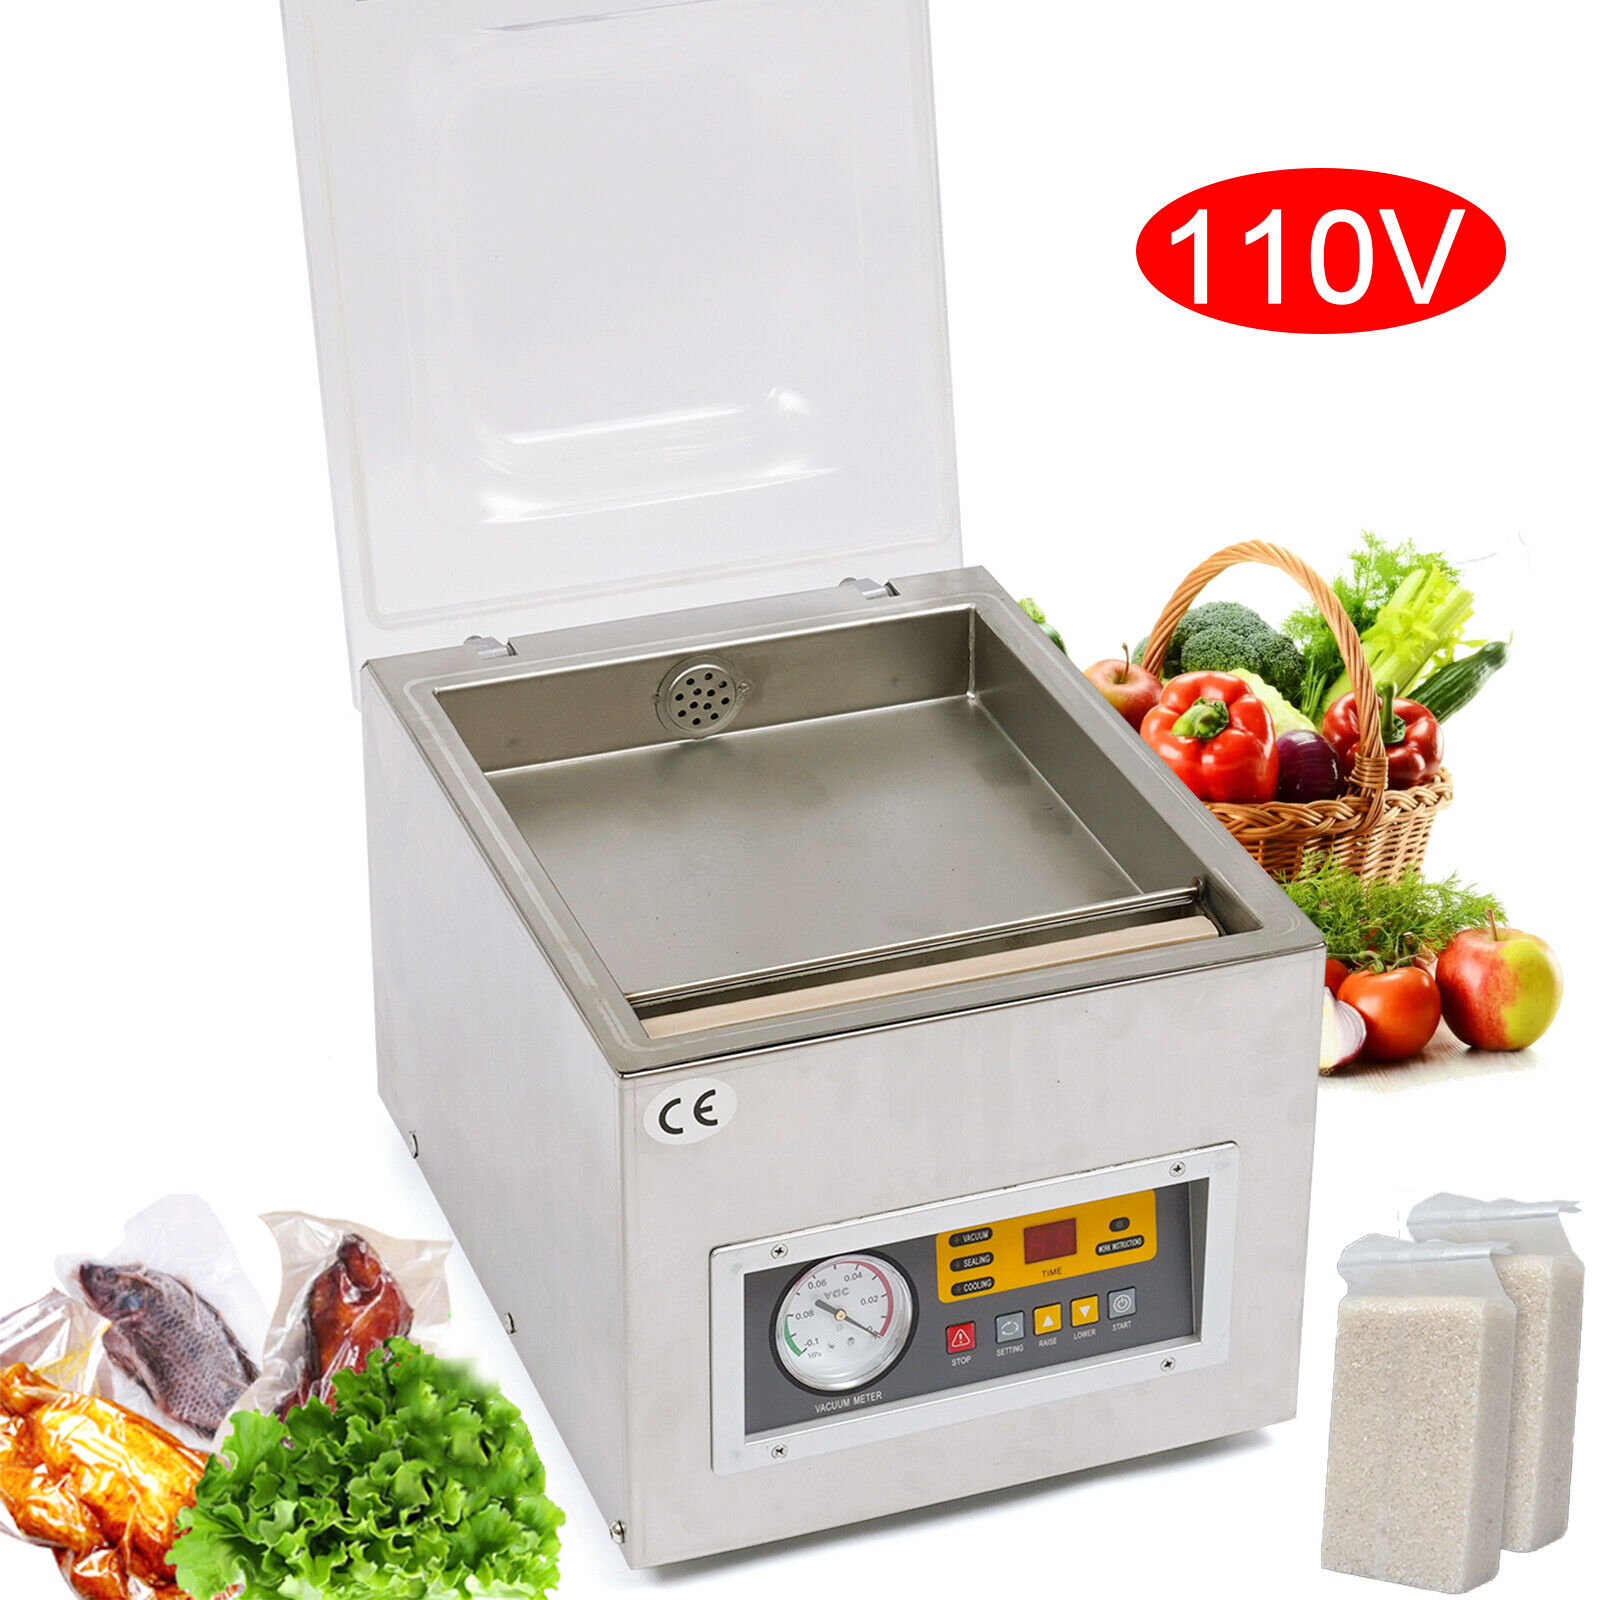 120W Table Top Commercial Vacuum Sealing Machine Packing Sealer Chamber DZ-260S